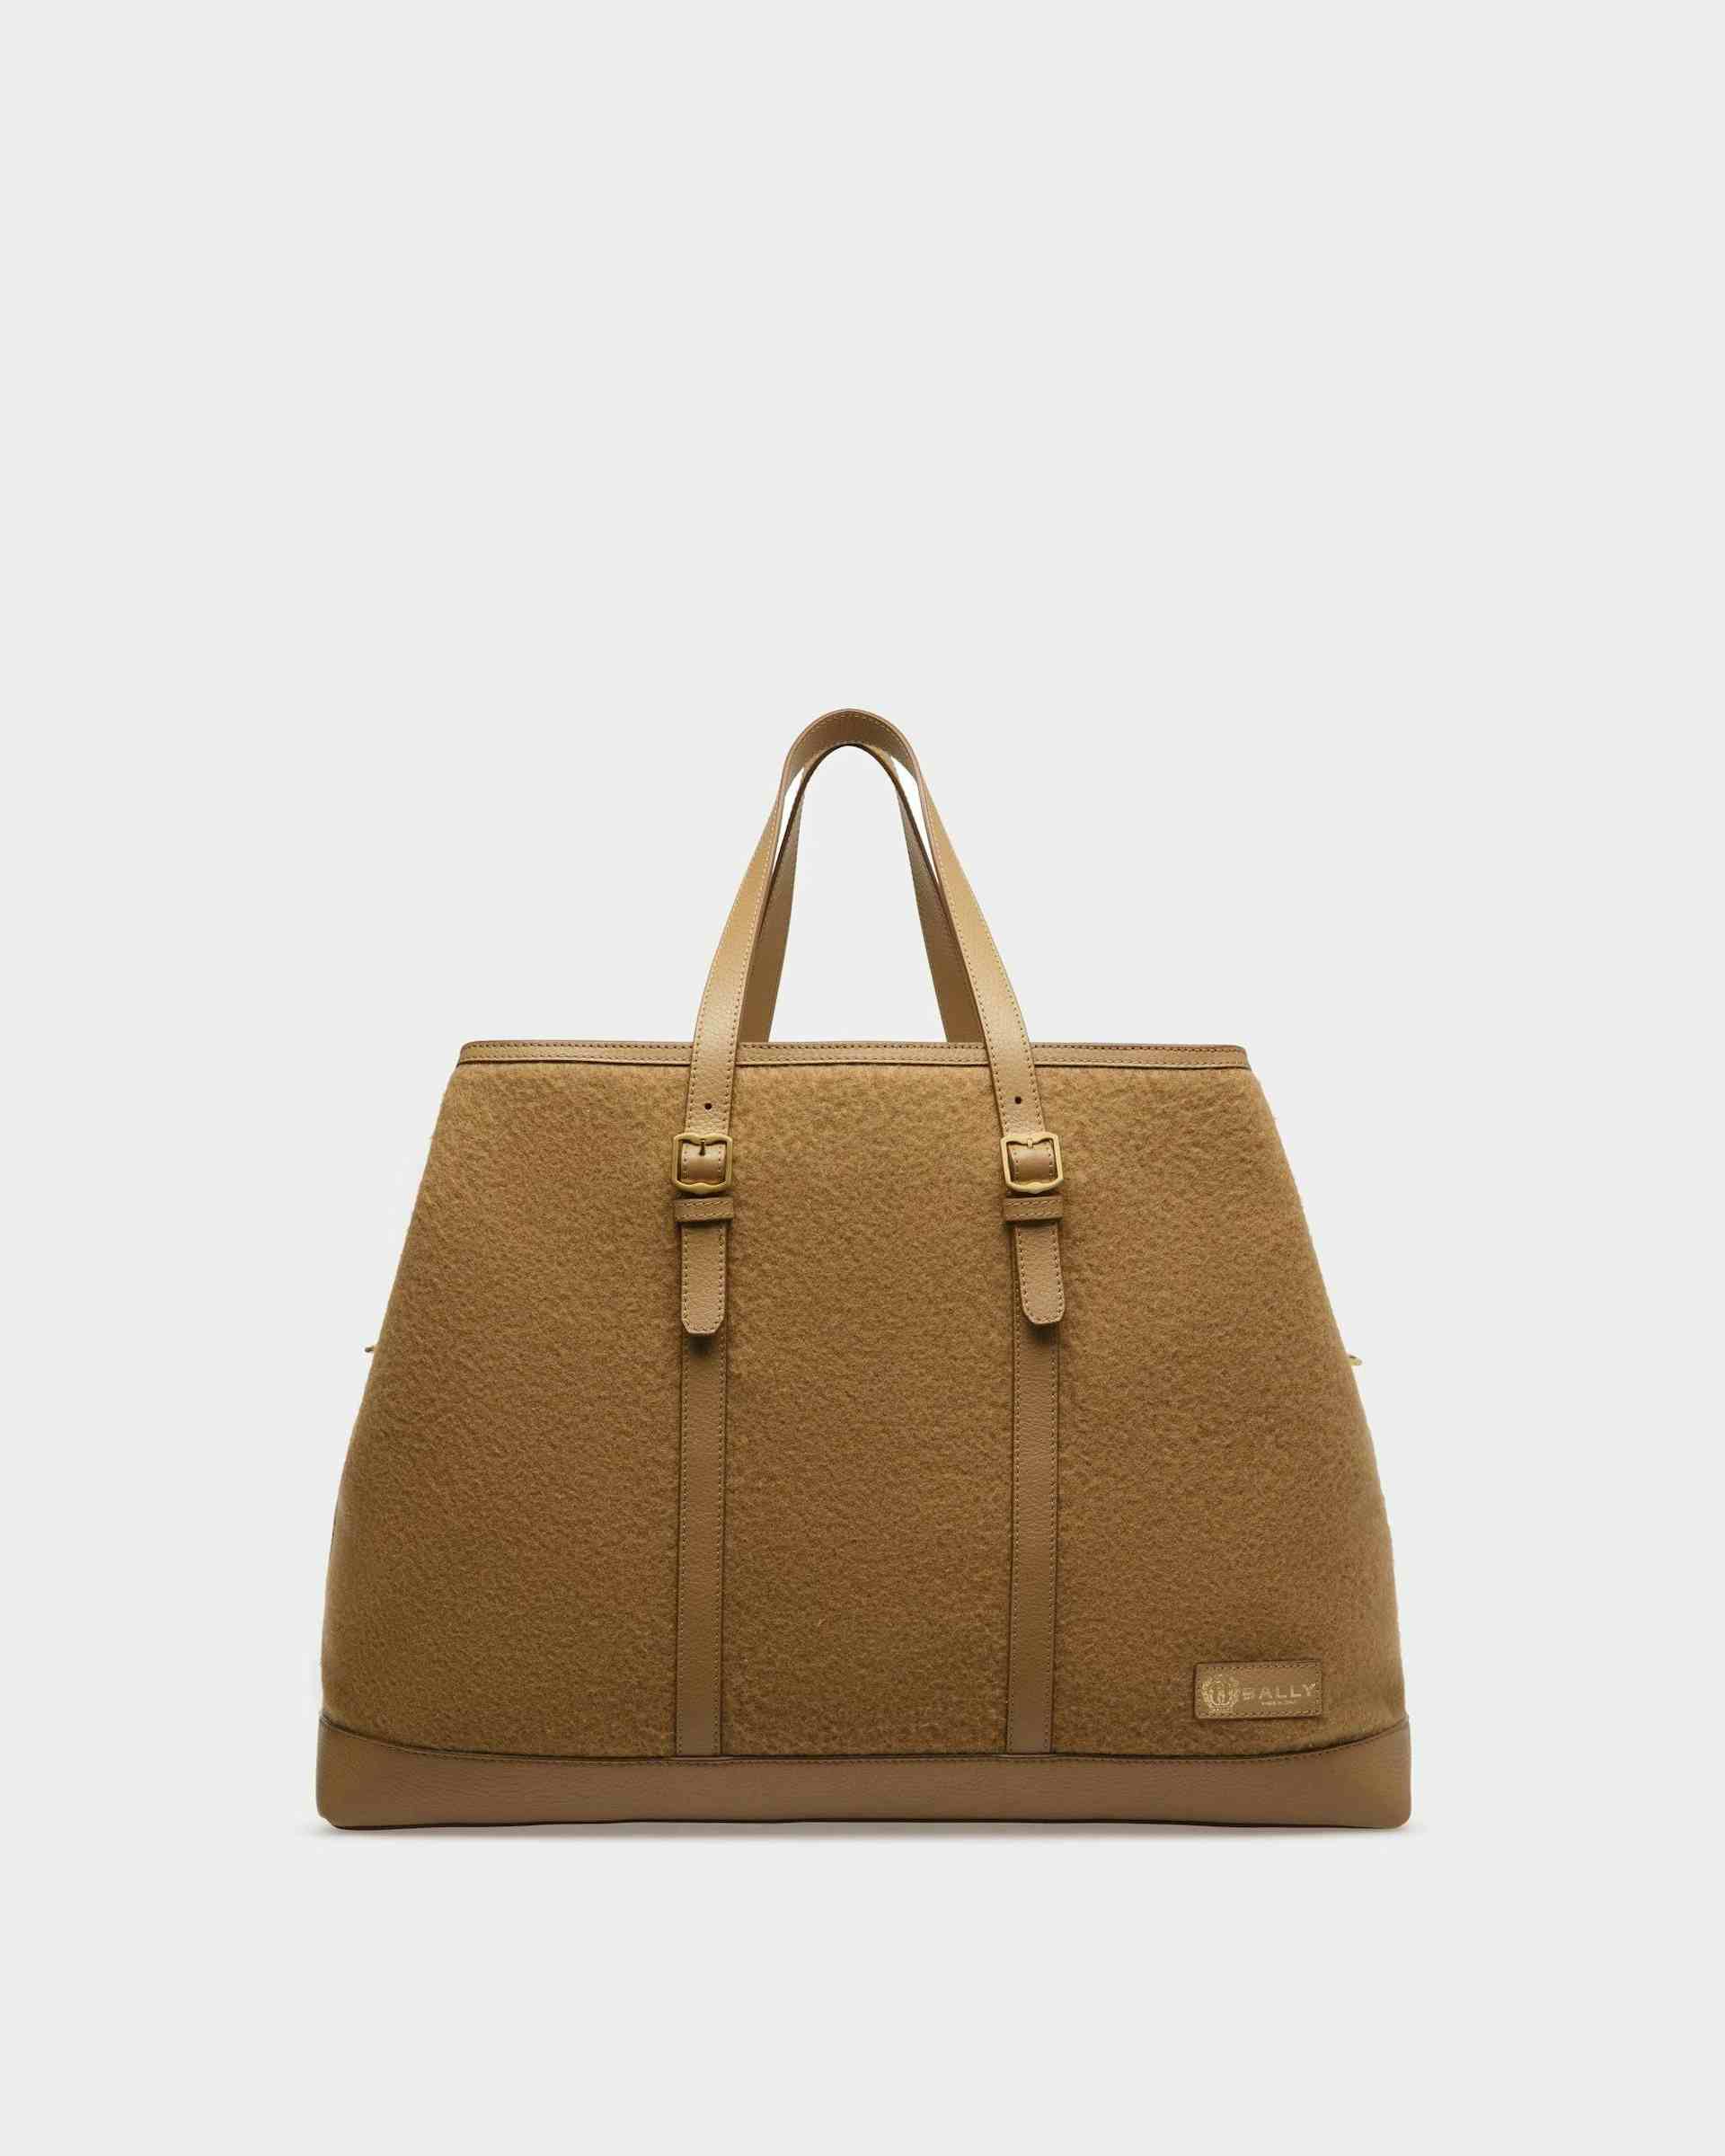 Gare Tote Bag In Camel Leather And Fabric - Men's - Bally